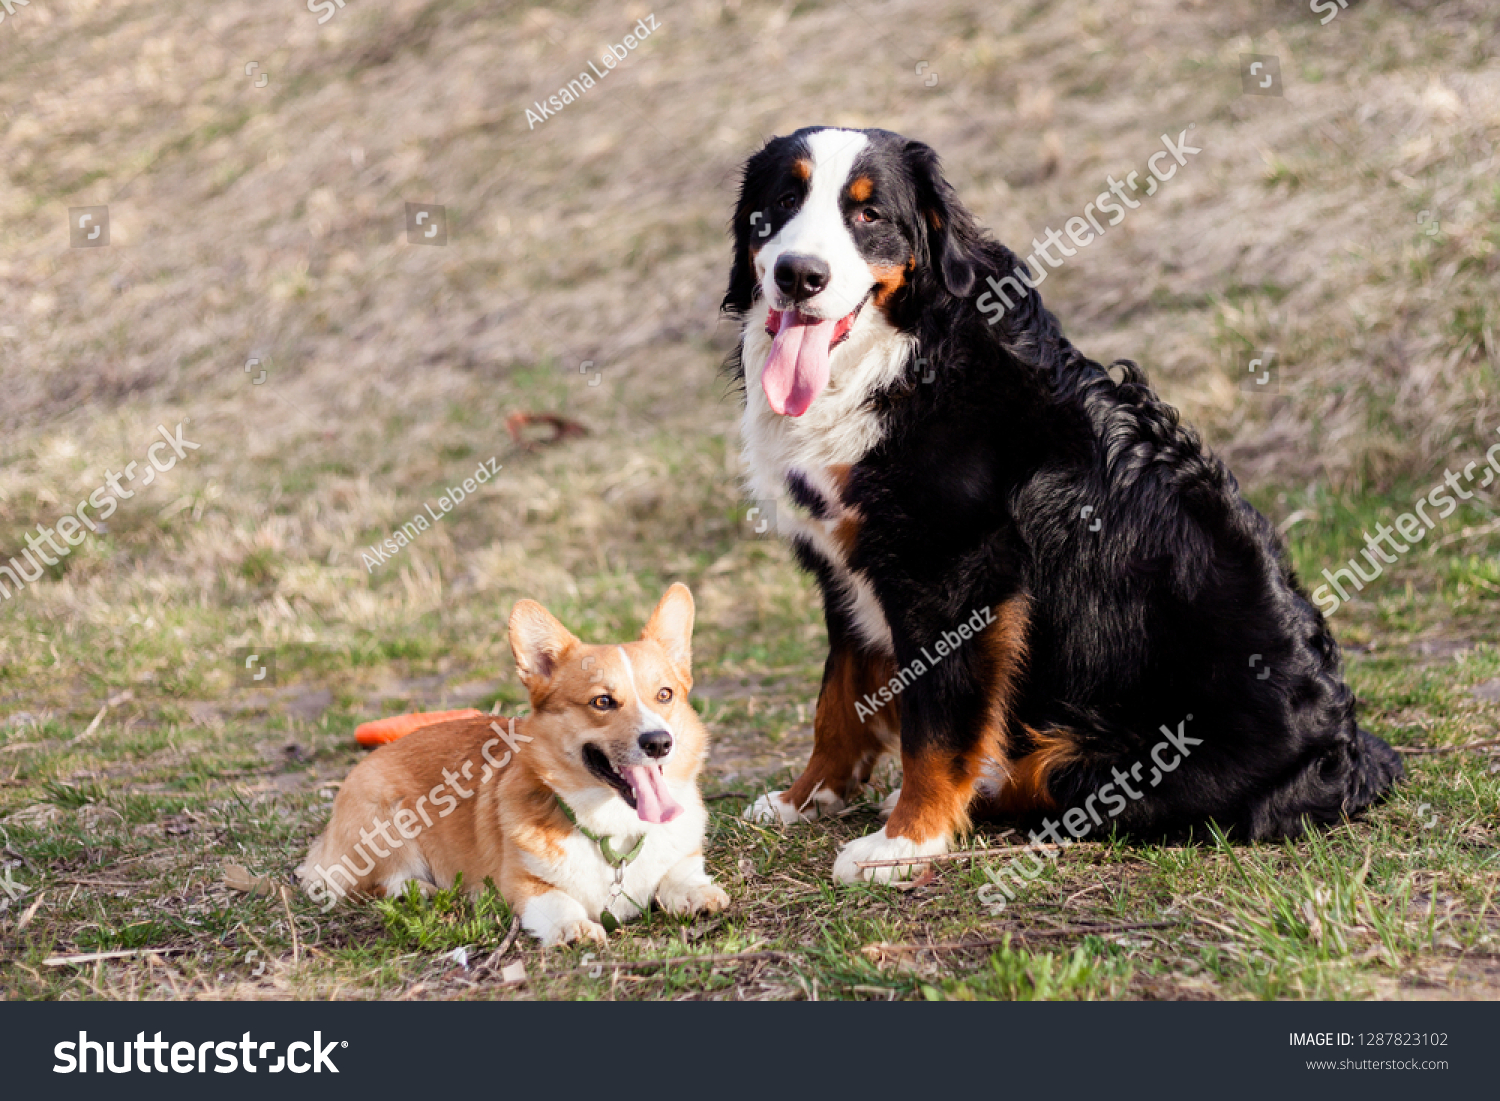 Two Dogs Big Small Bernese Mountain Animals Wildlife Stock Image 1287823102